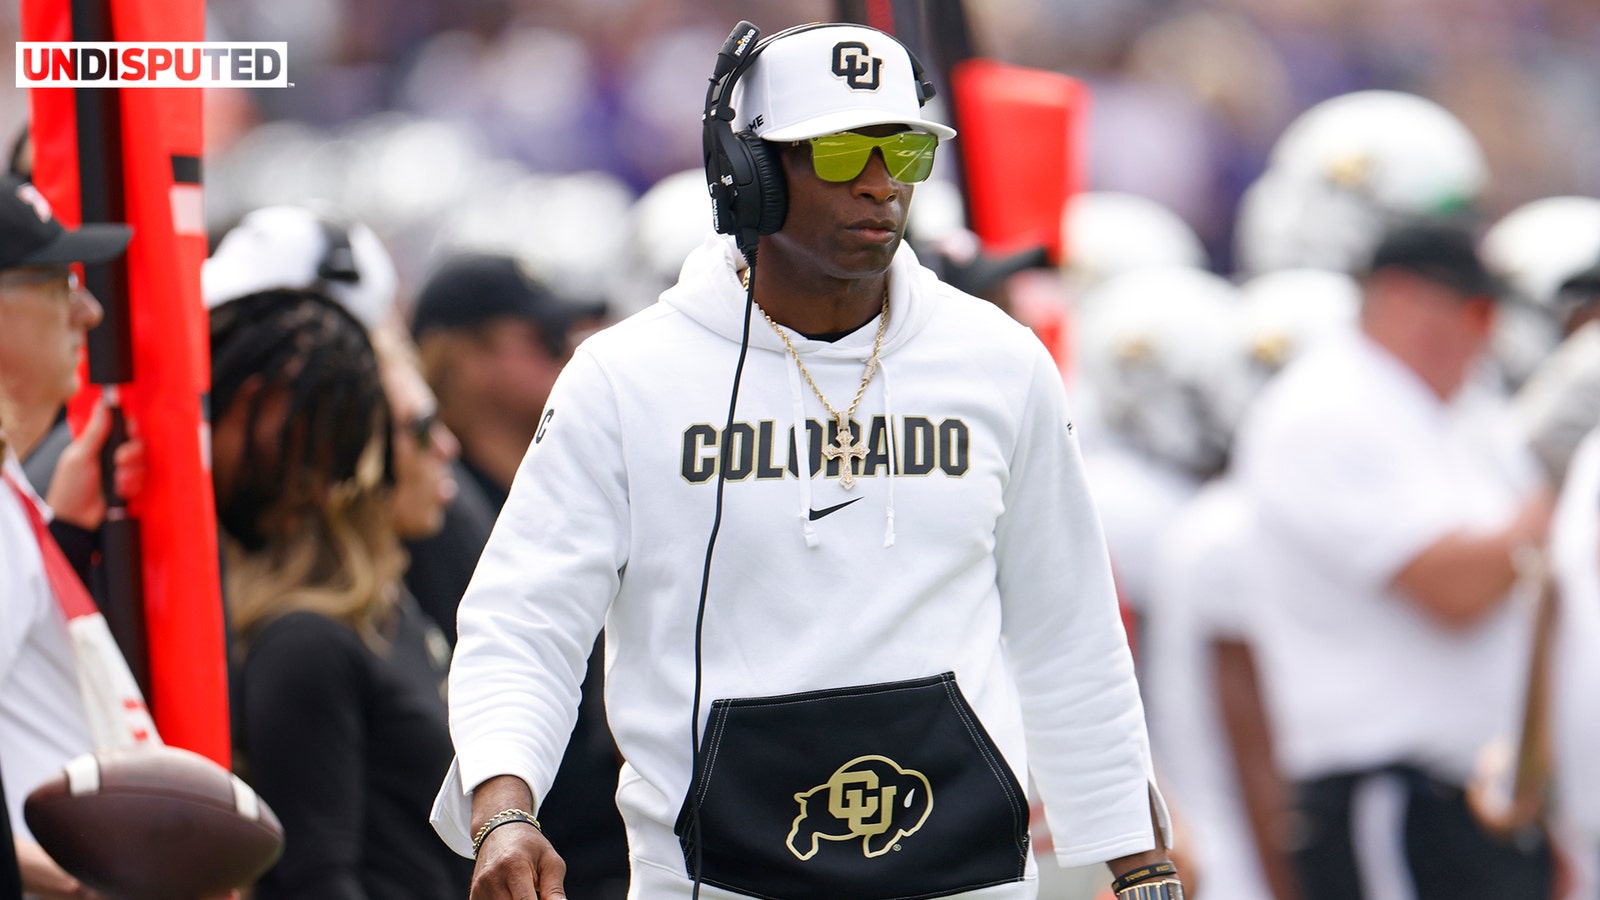 Deion Sanders addresses opposing coaches who took verbal shots